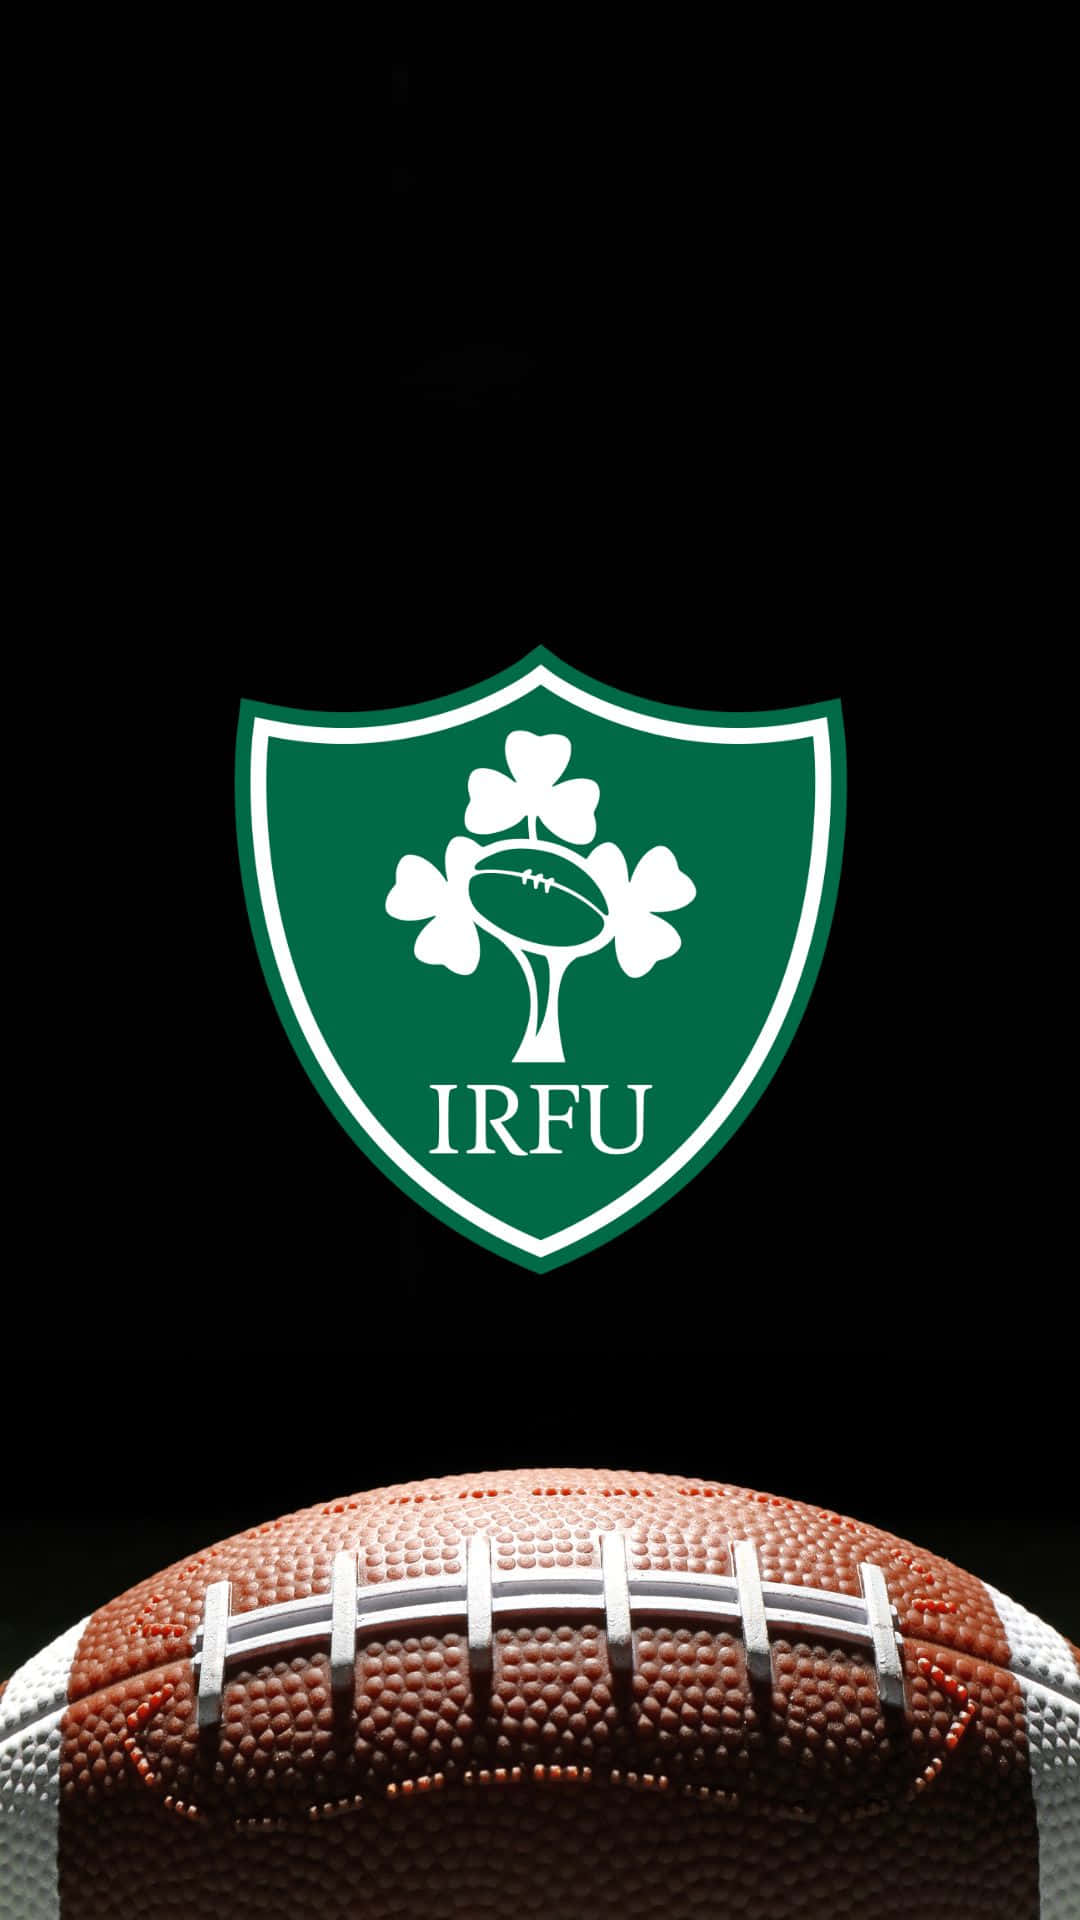 Irish Rugby Team in Action Wallpaper